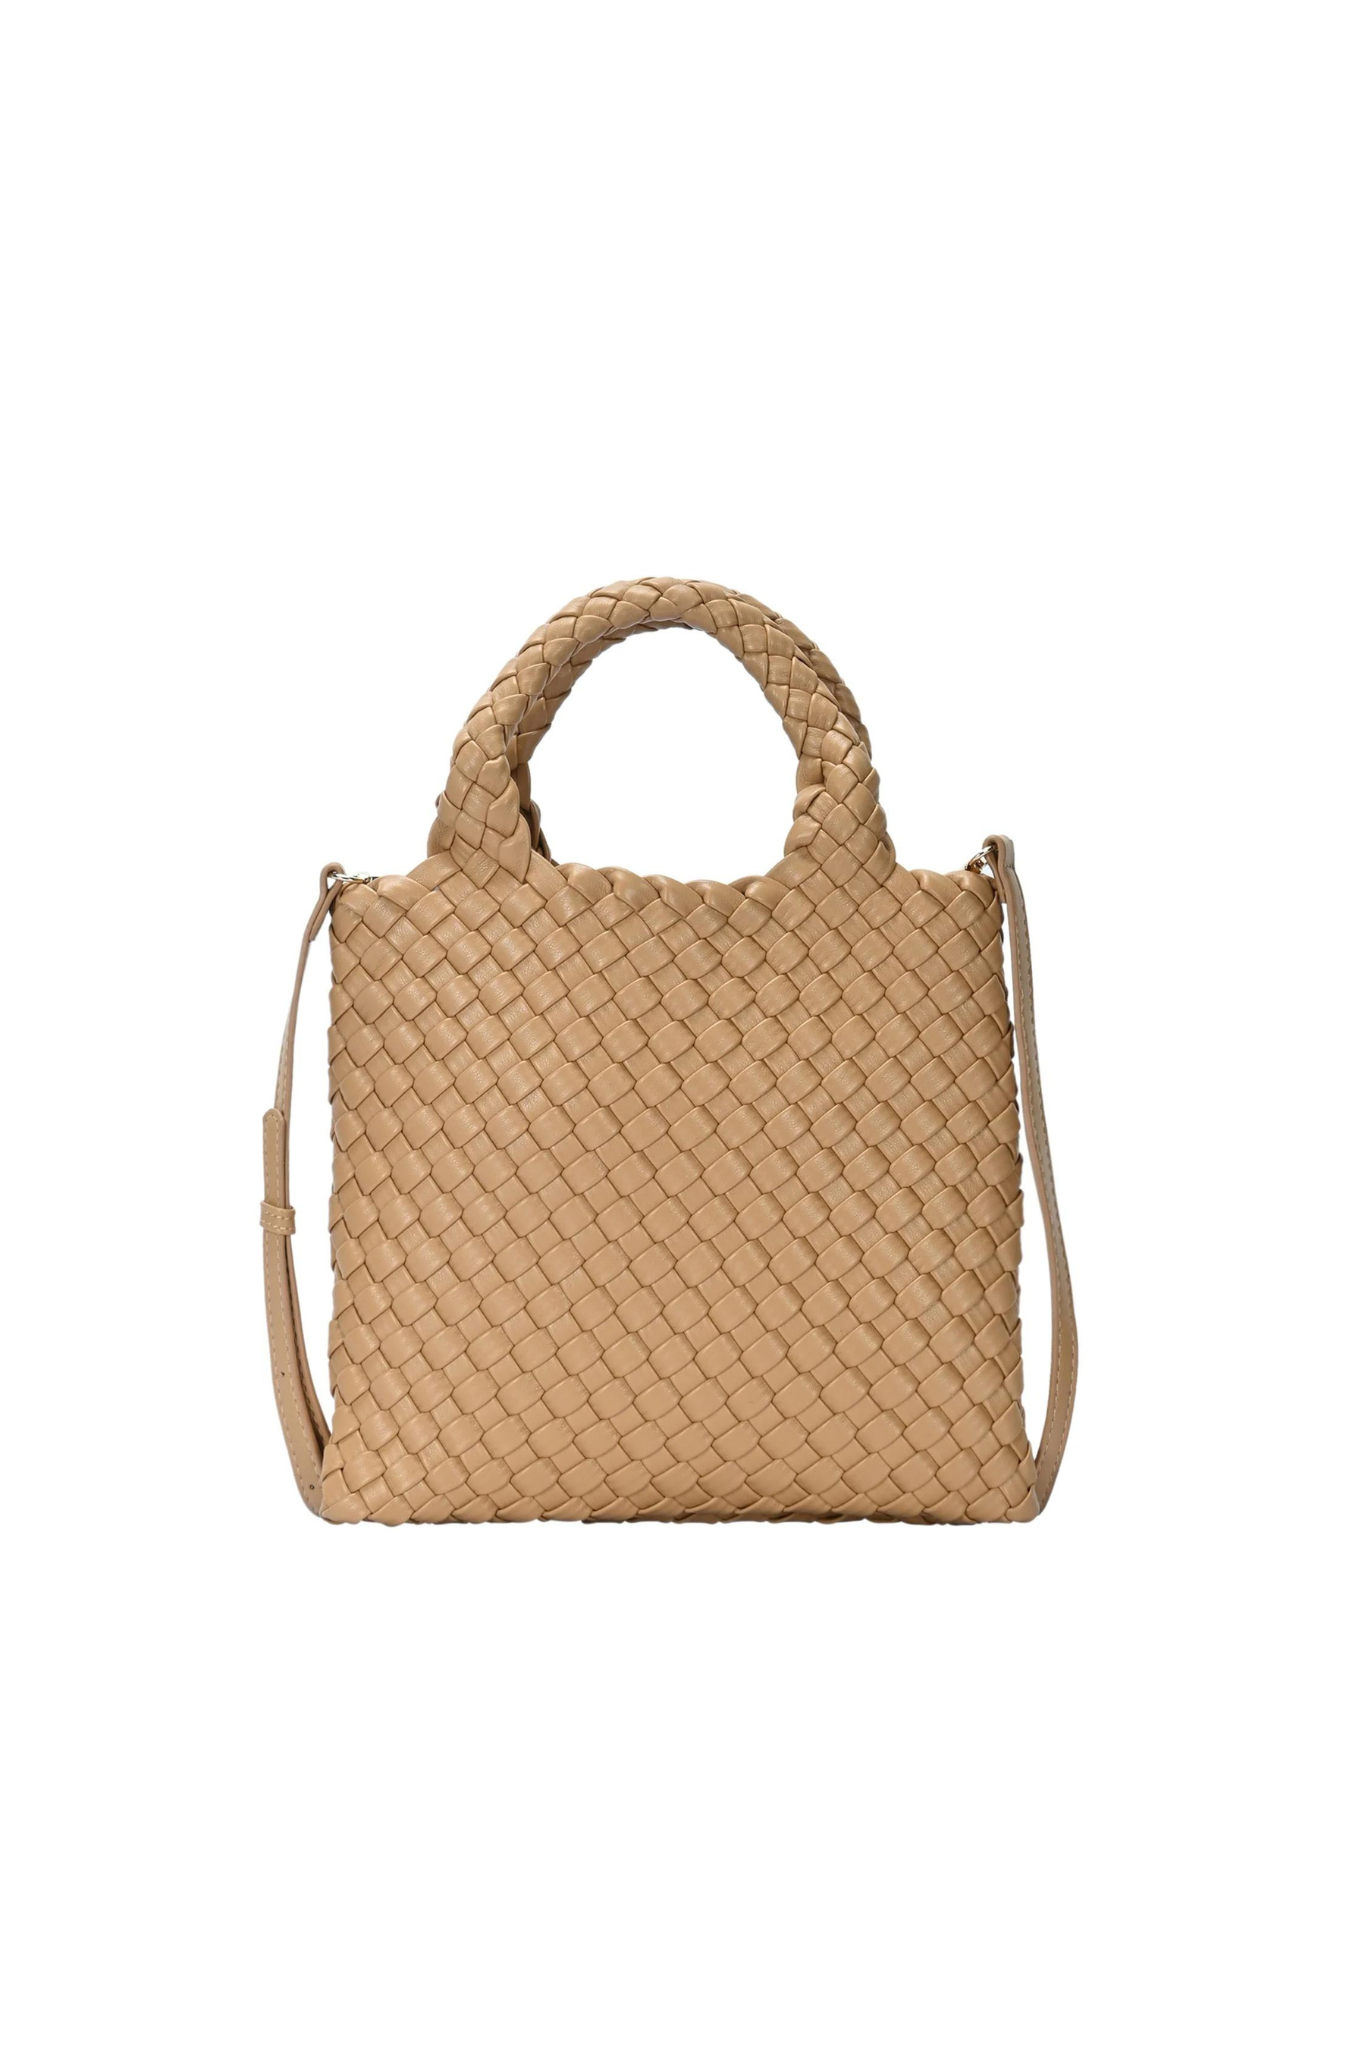 2 in 1 Woven Handle Tote Bag with Clutch Set in Tan_Front